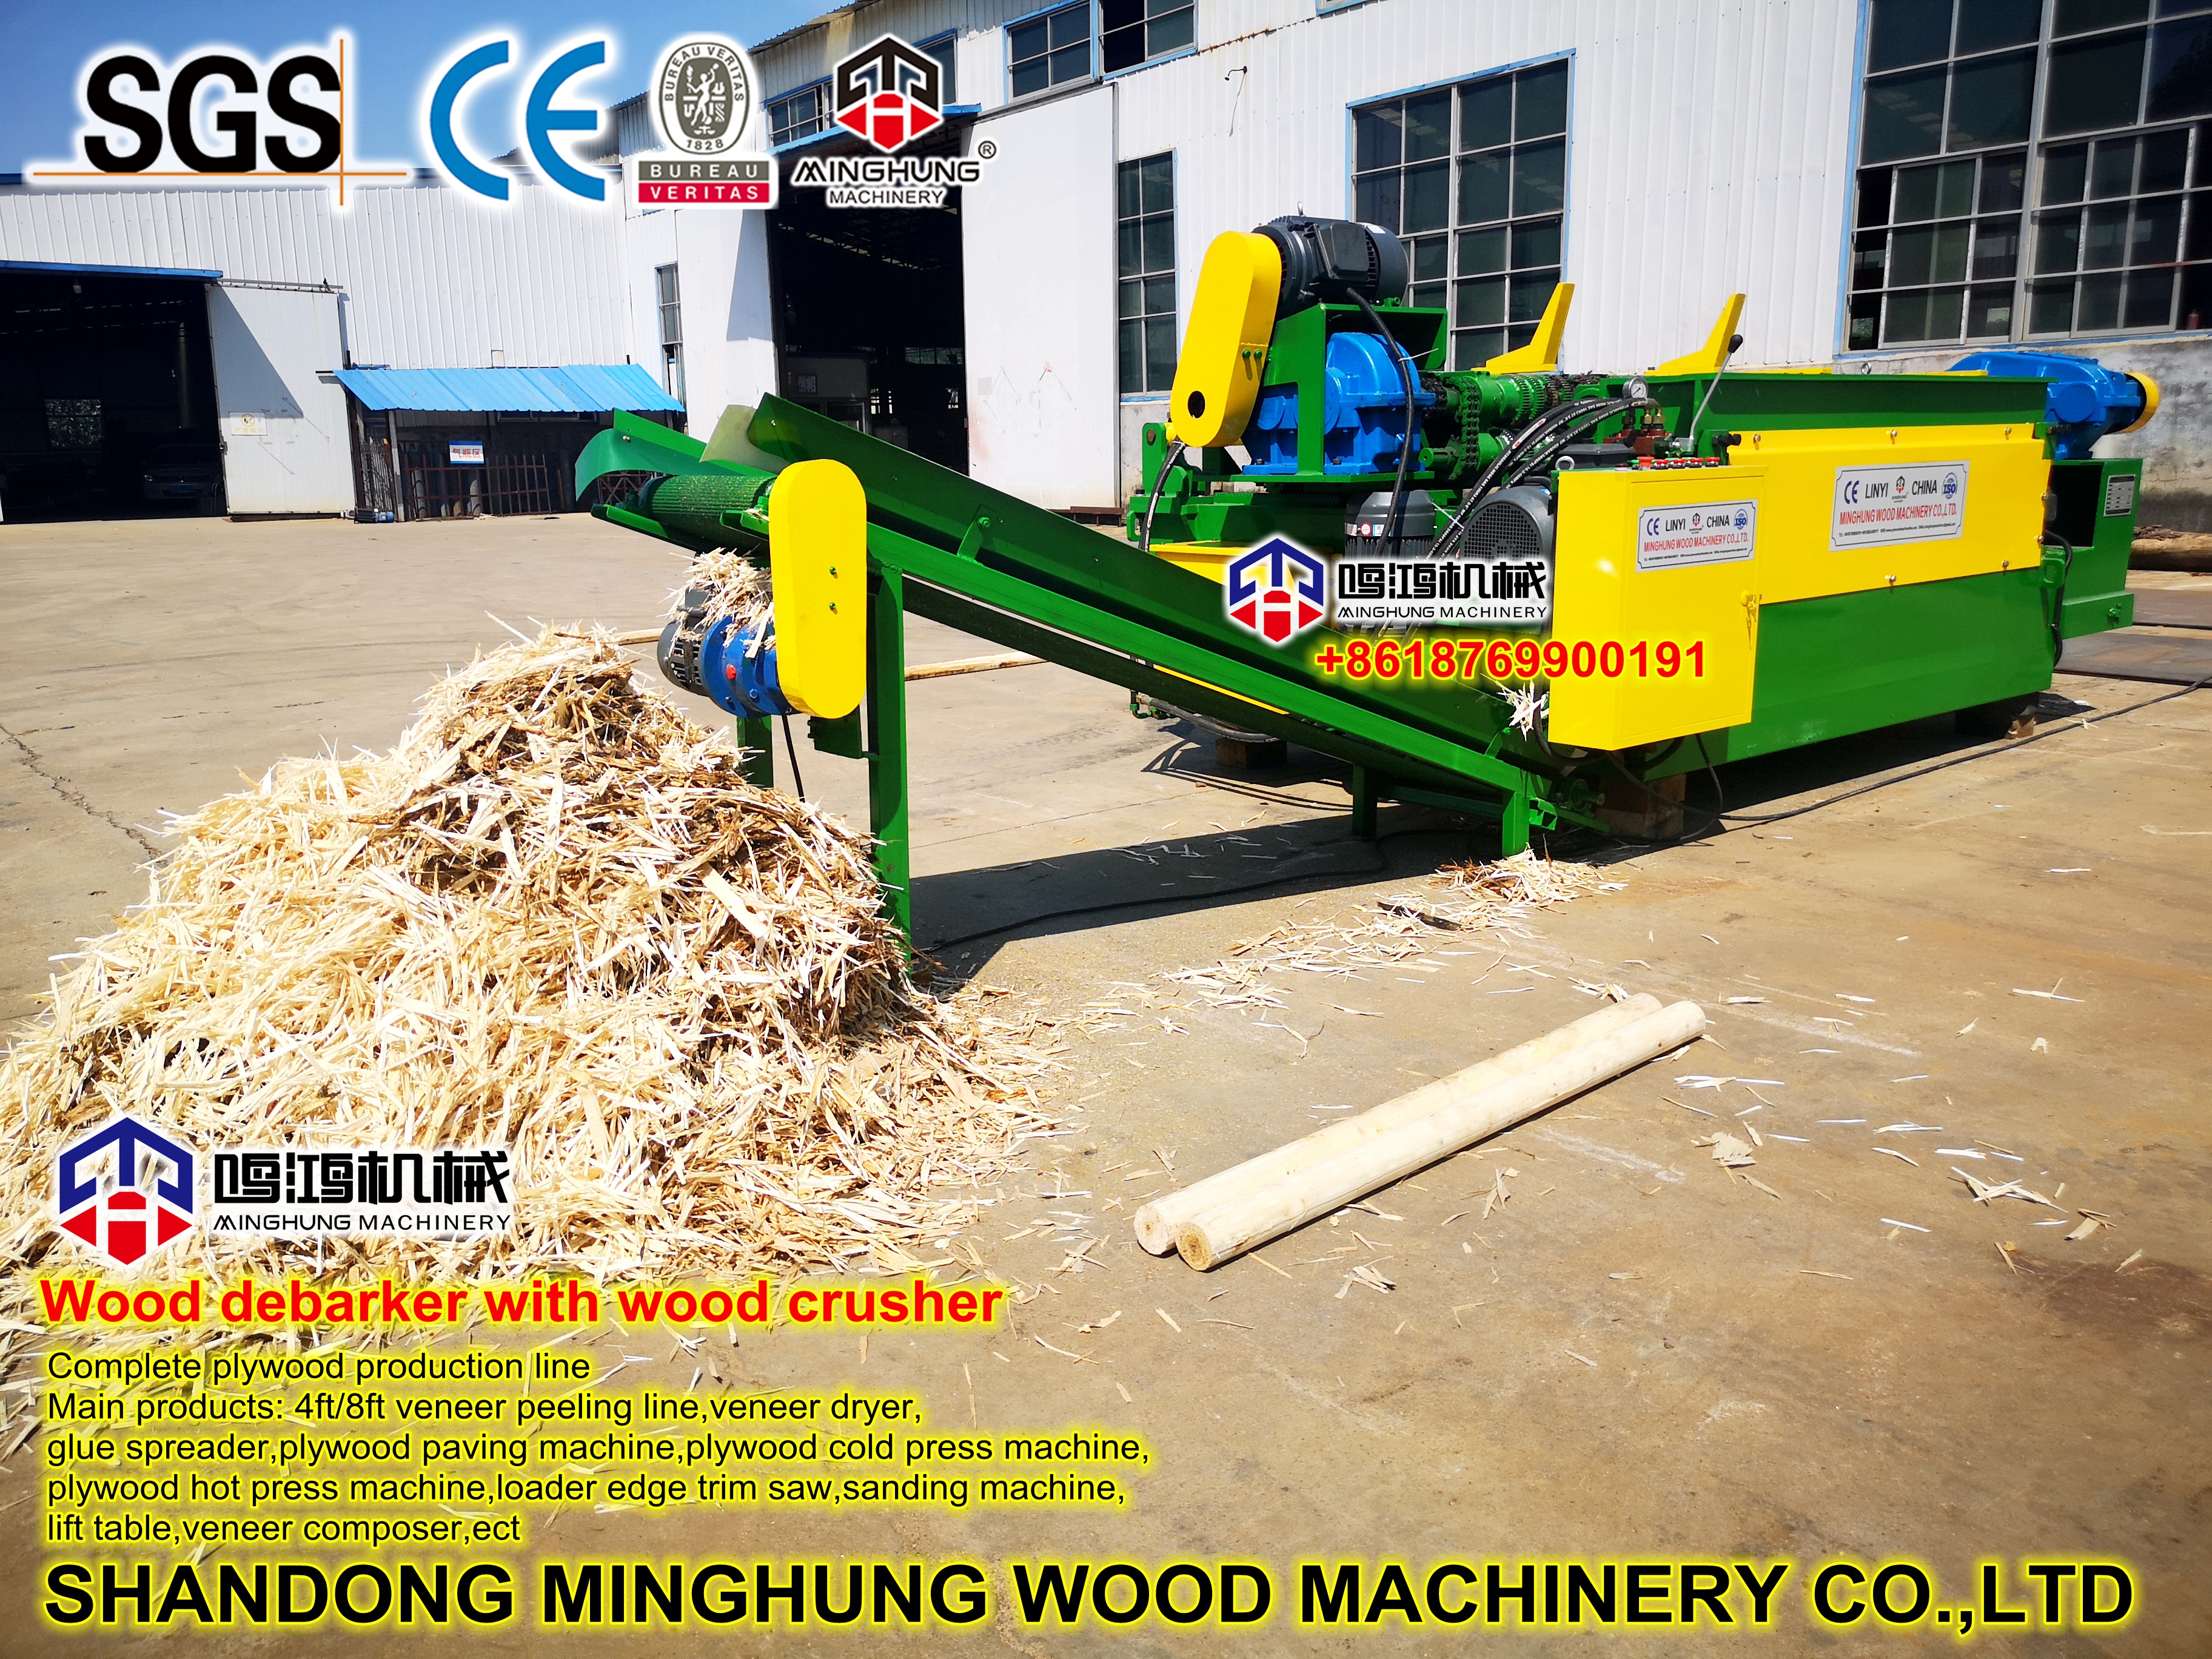 plywood production line machine副本_副本